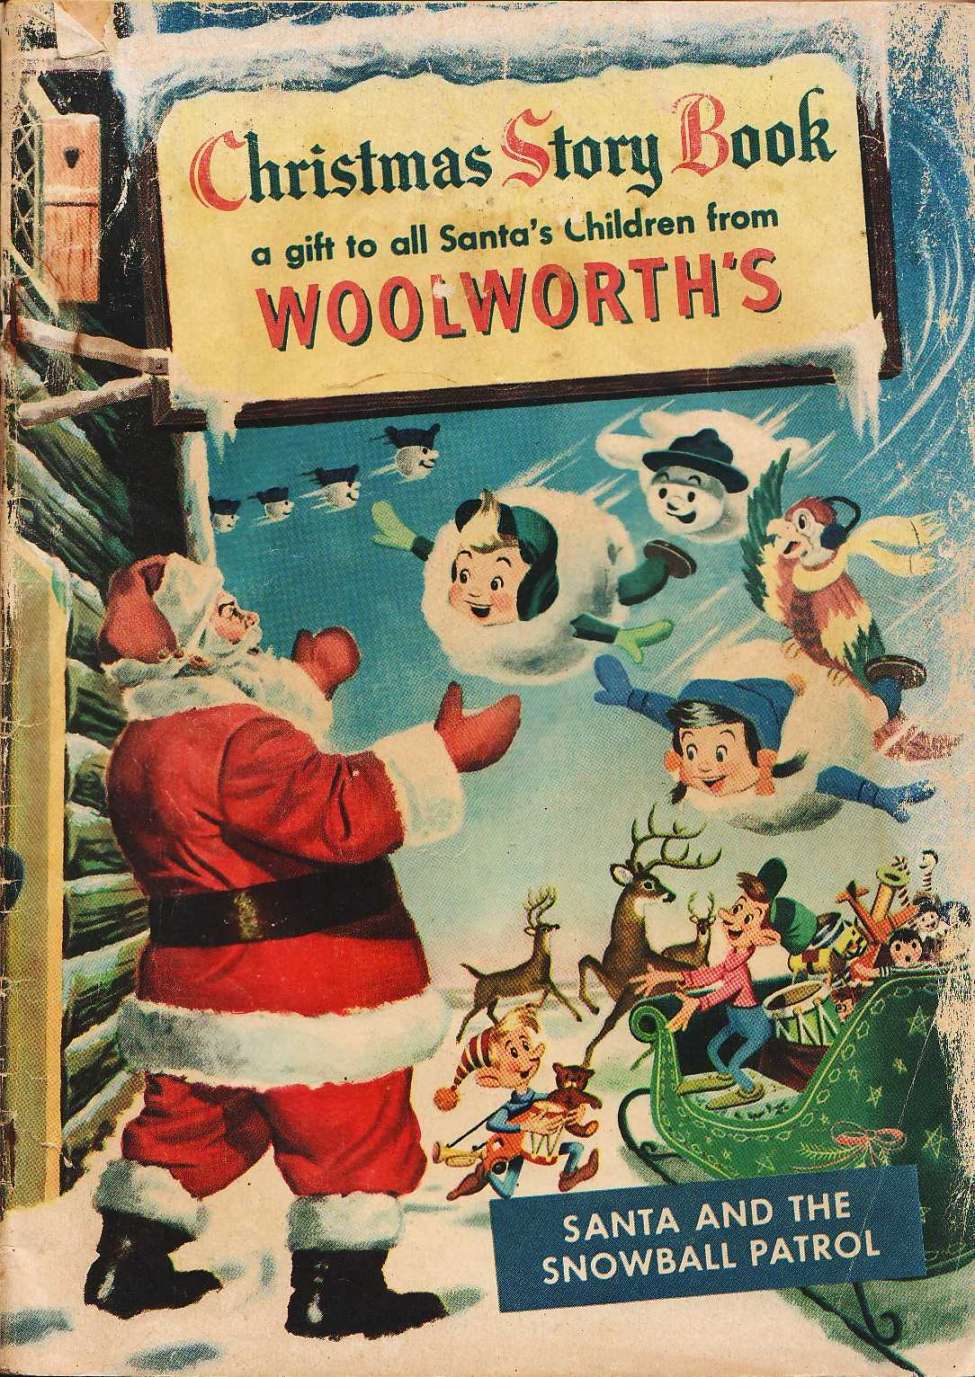 Book Cover For Woolworth's Christmas Story Book 1953